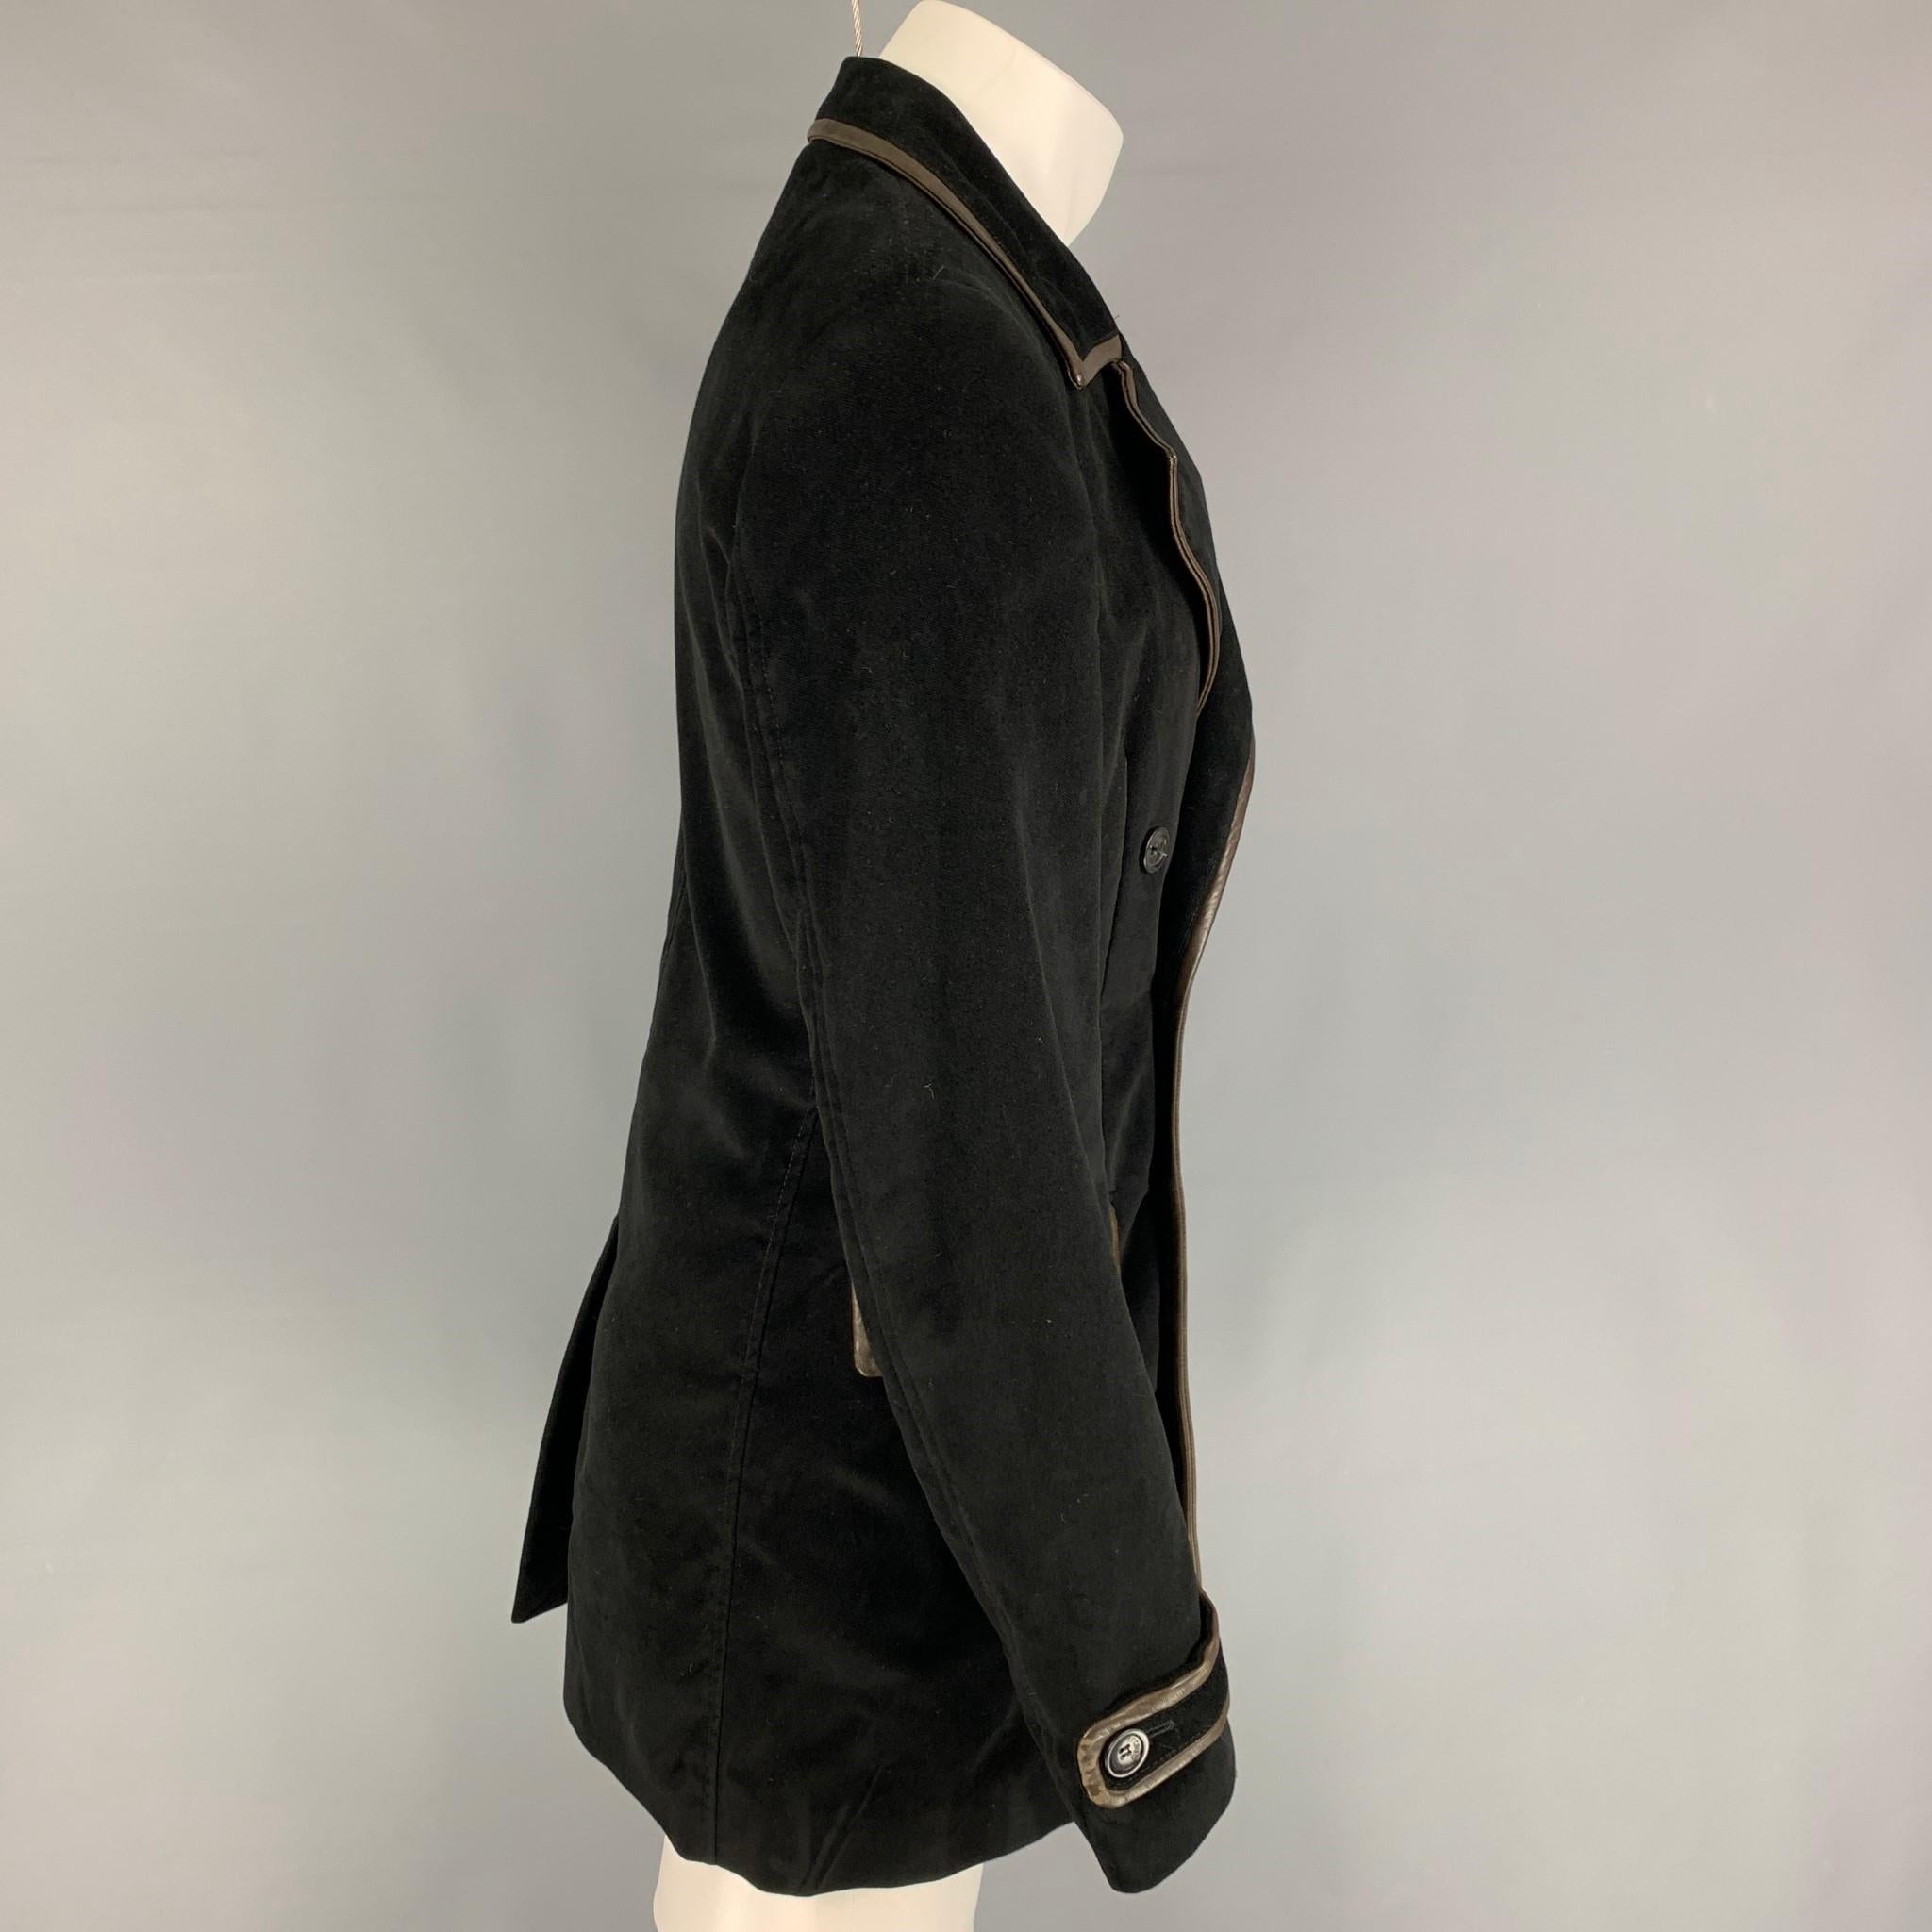 JUST CAVALLI coat comes in a black viscose / cotton with a full liner featuring a leather trim, notch lapel, lap pockets, single back vent, and a double breasted closure. Made in Italy. 

Very Good Pre-Owned Condition.
Marked: Size tag